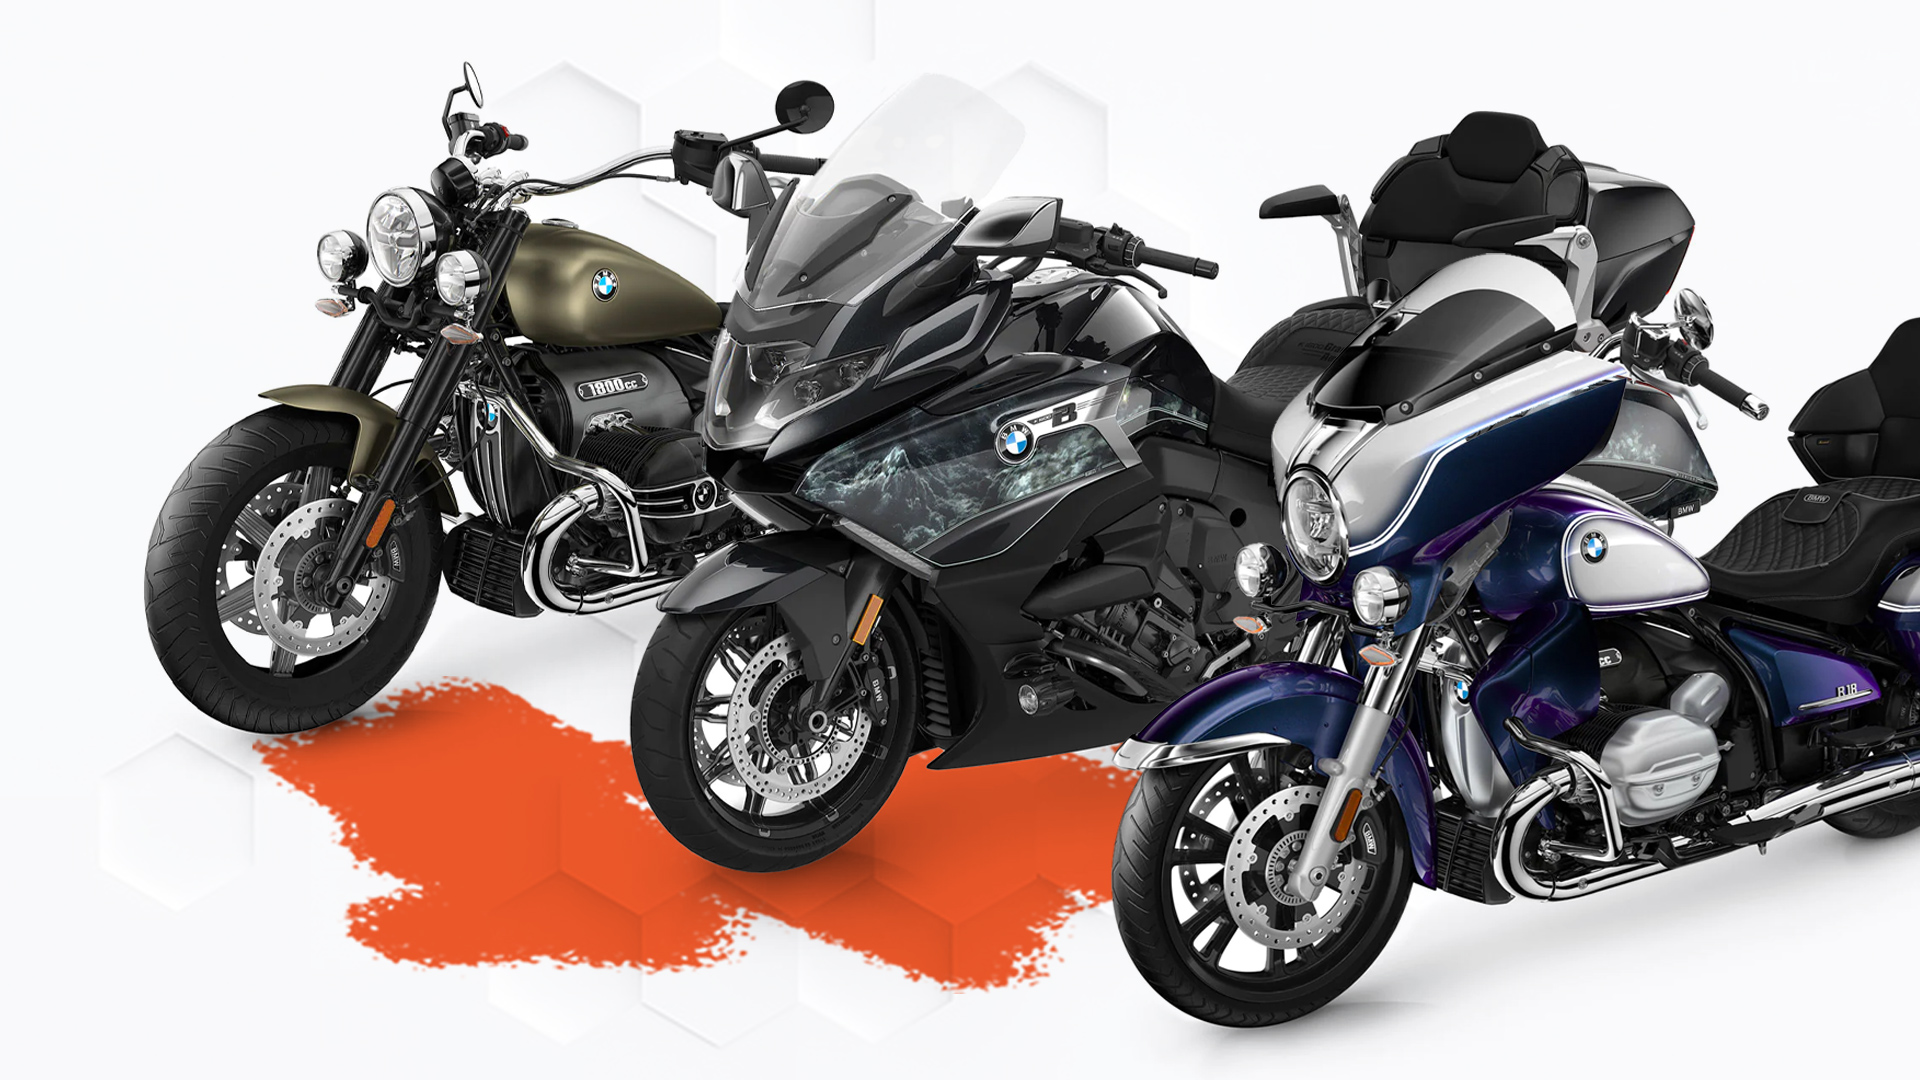 The 2022 BMW Motorcycle Lineup + Our Take On Each Model - webBikeWorld